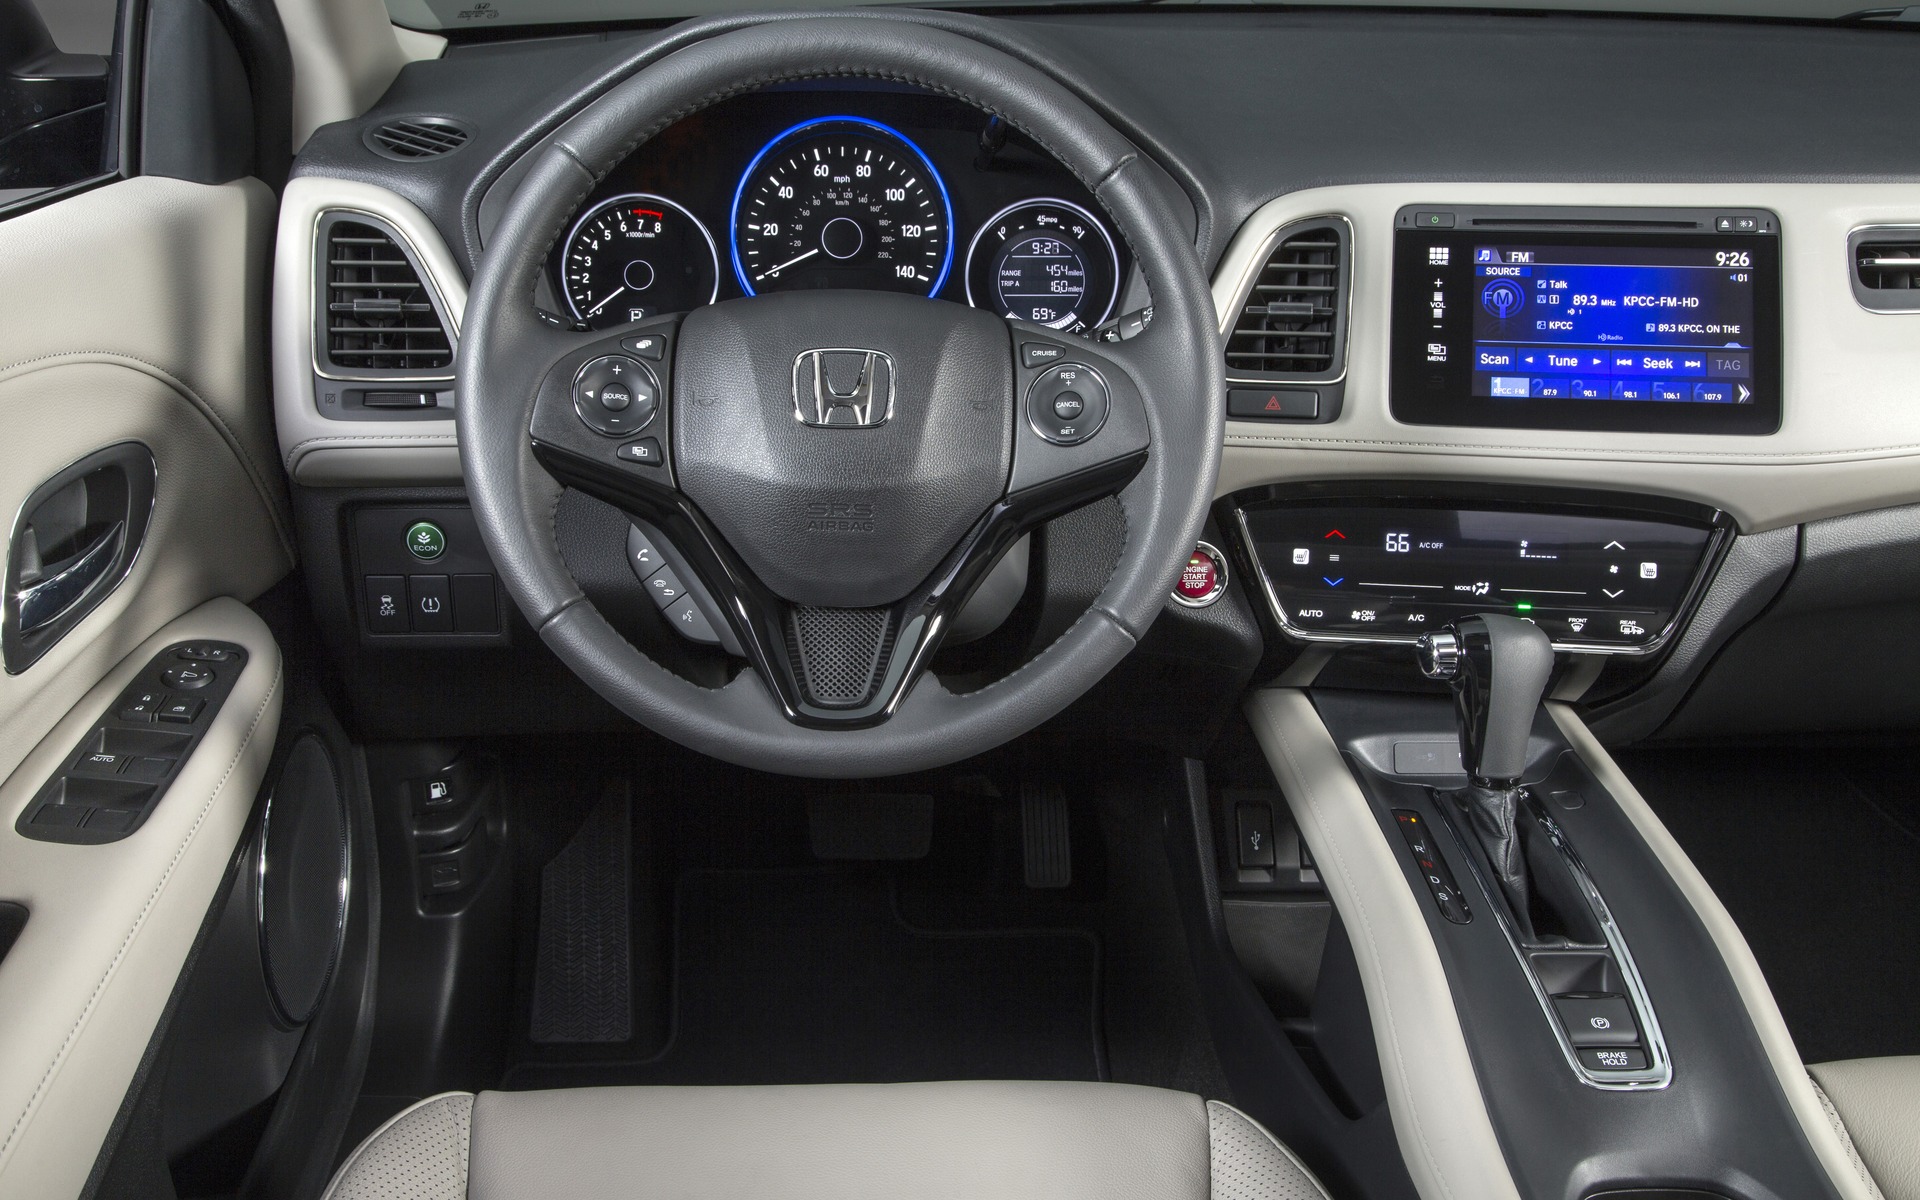 Multifunction steering wheel and colour touchscreen.